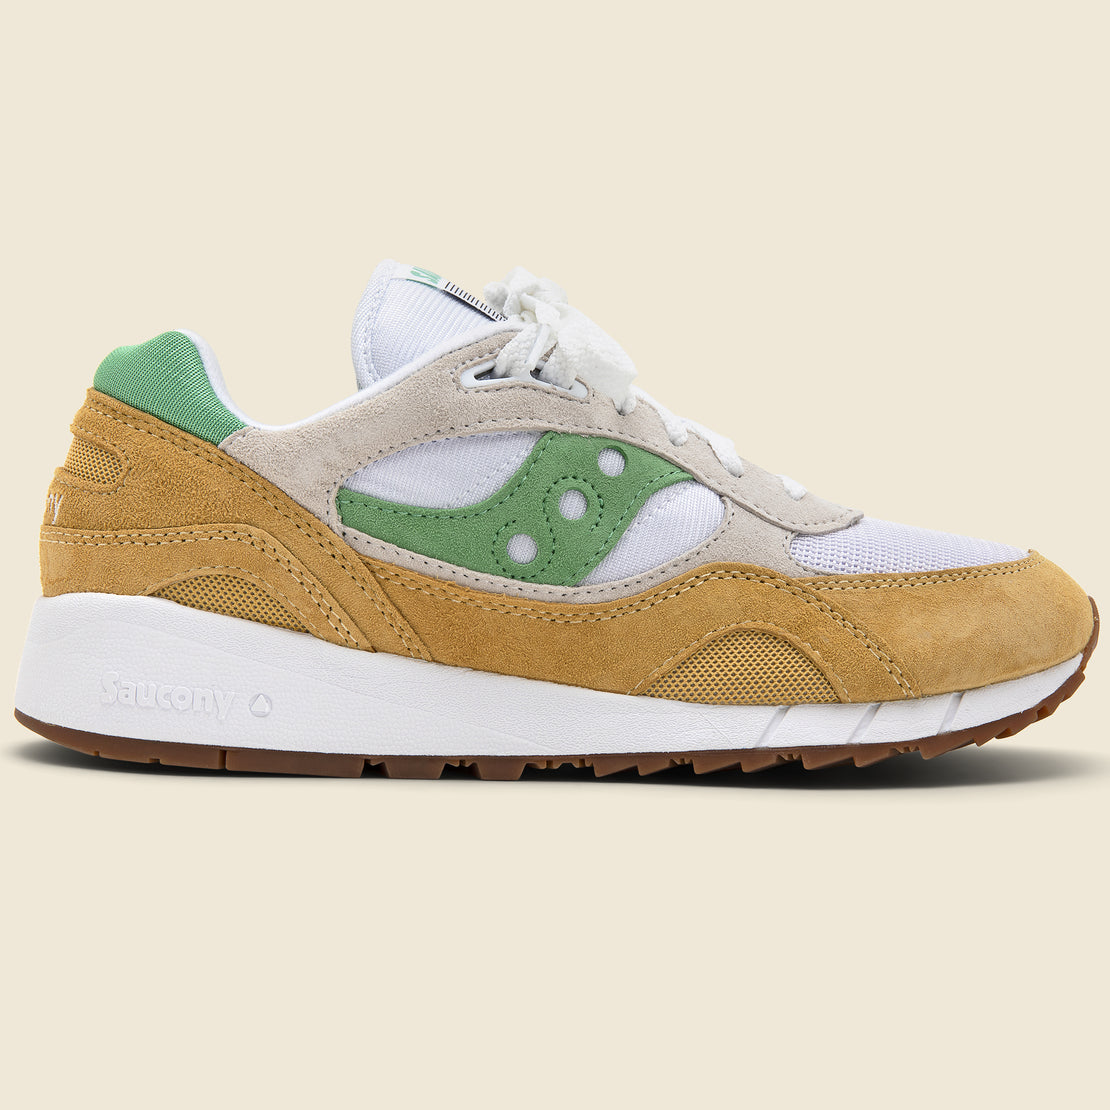 Saucony Shadow 6000 Sneaker - White/Mint/Yellow